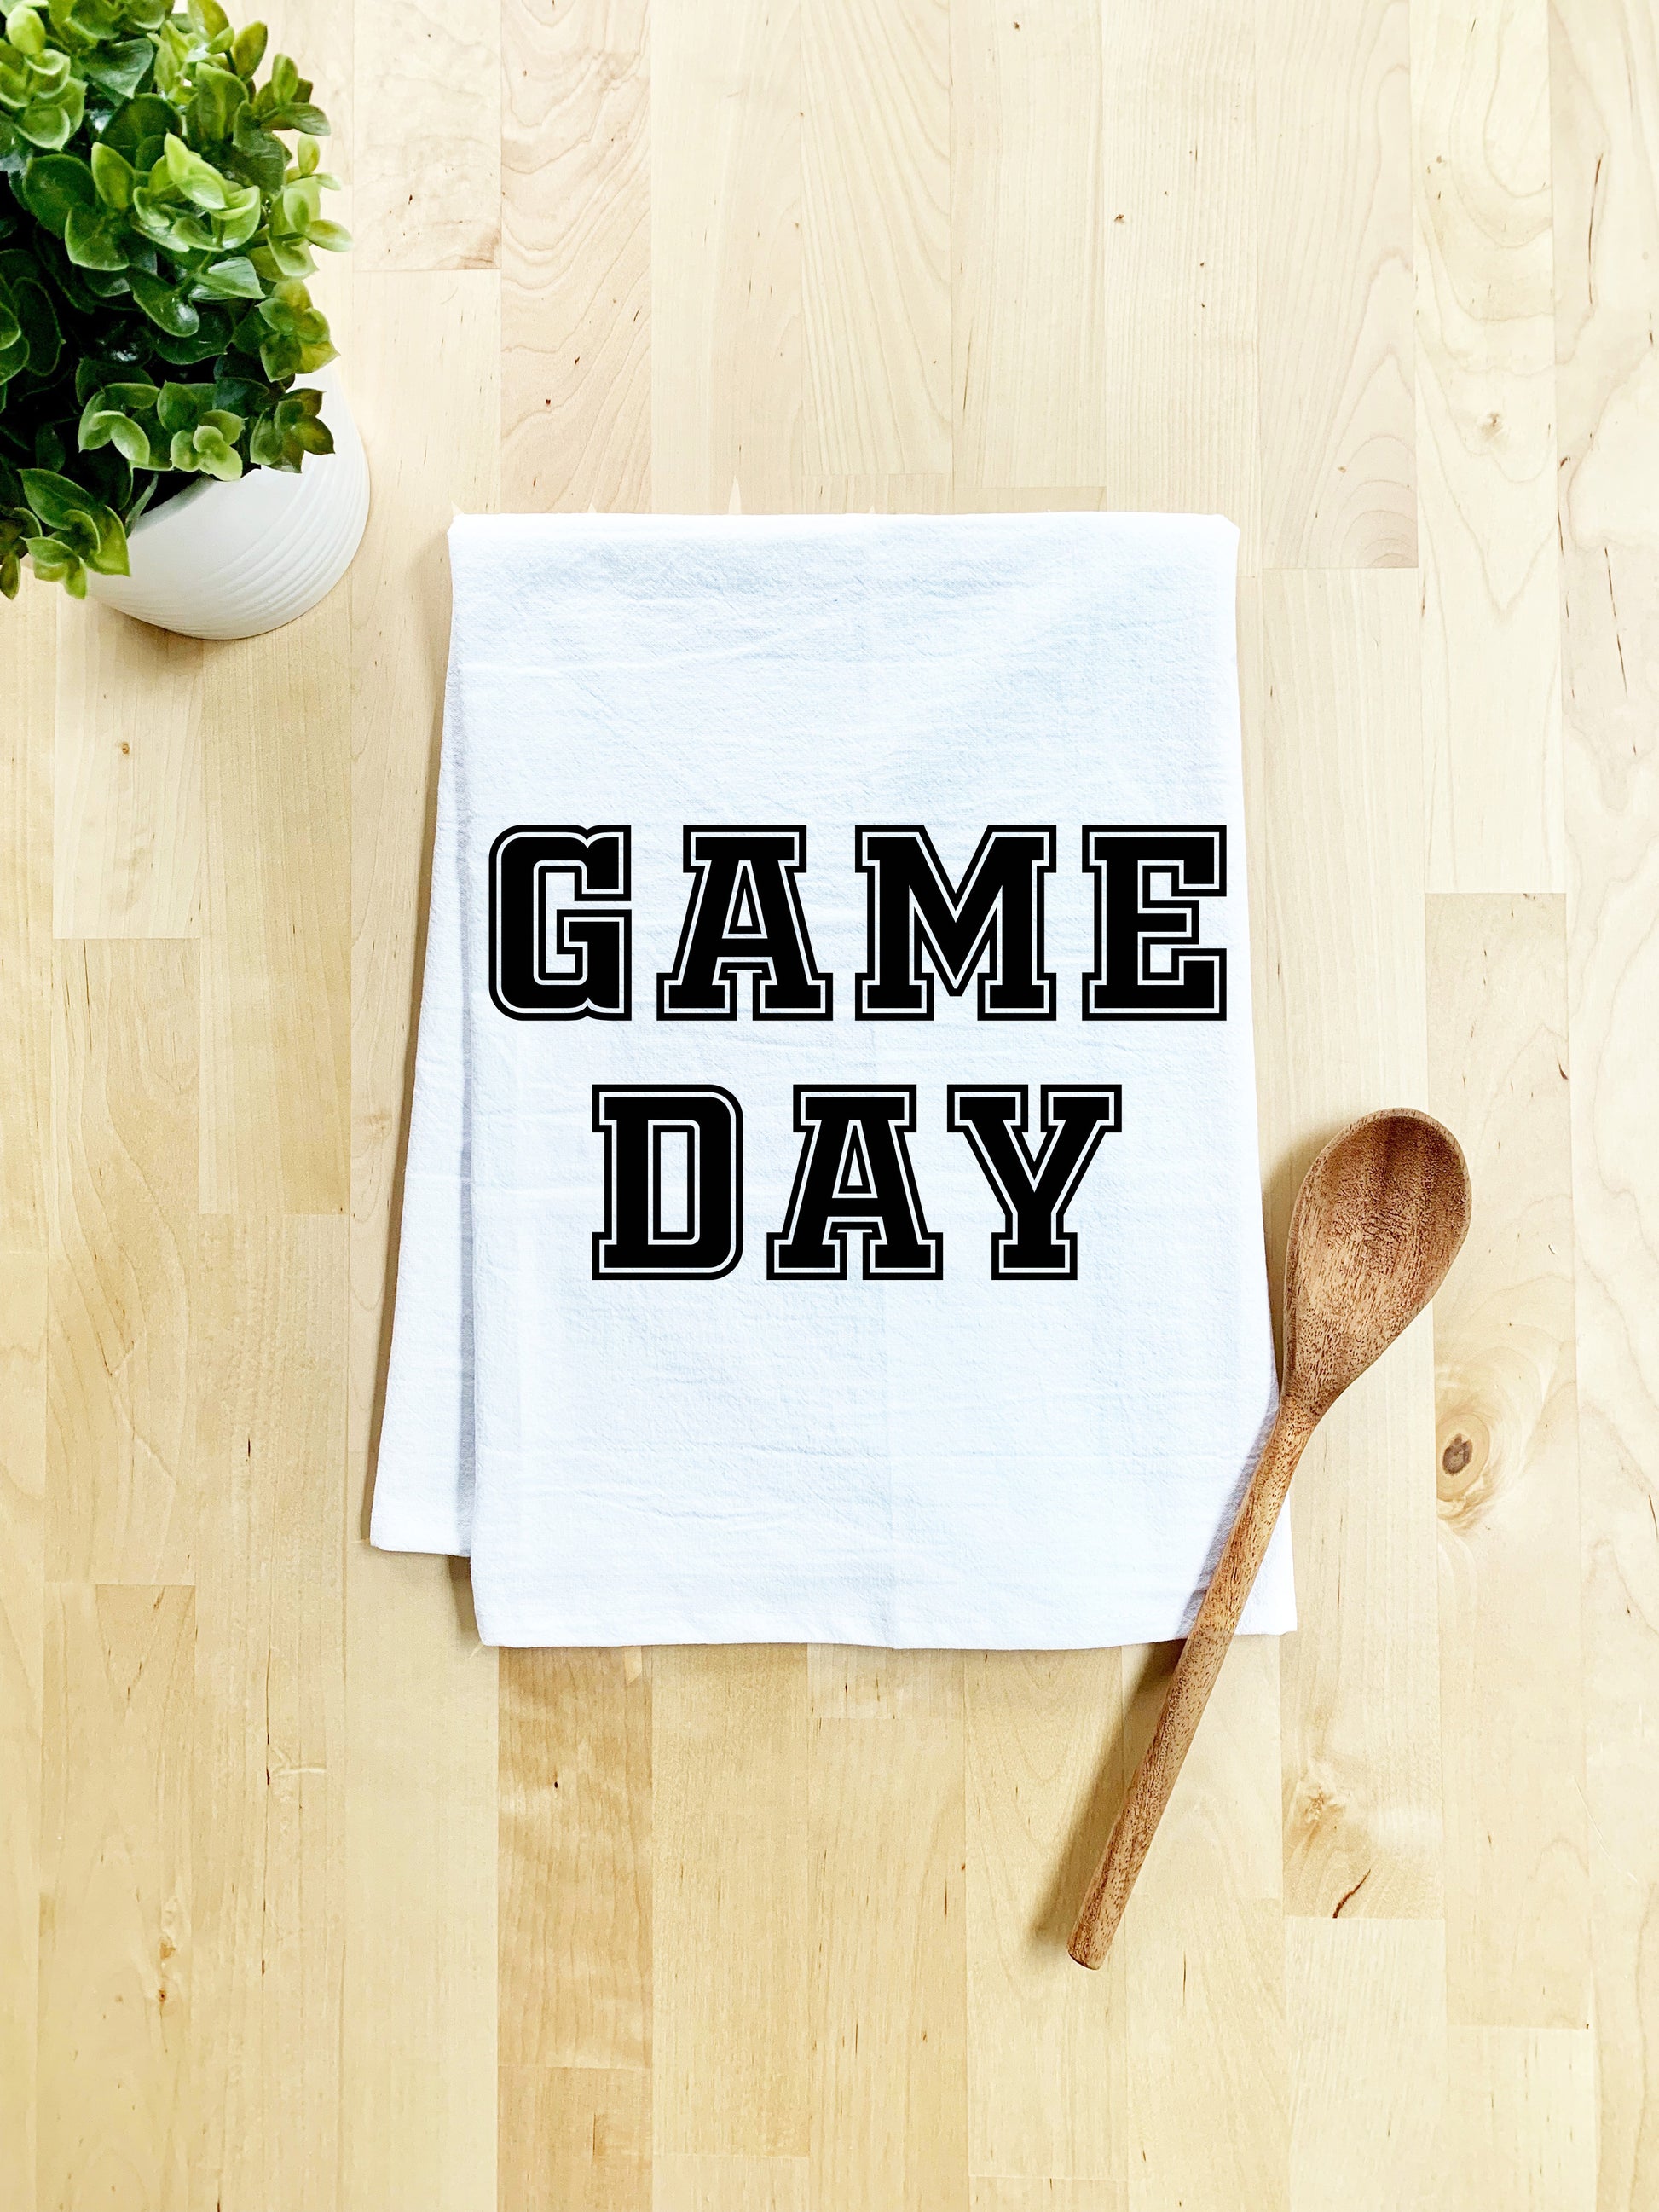 a dish towel that says game day next to a wooden spoon